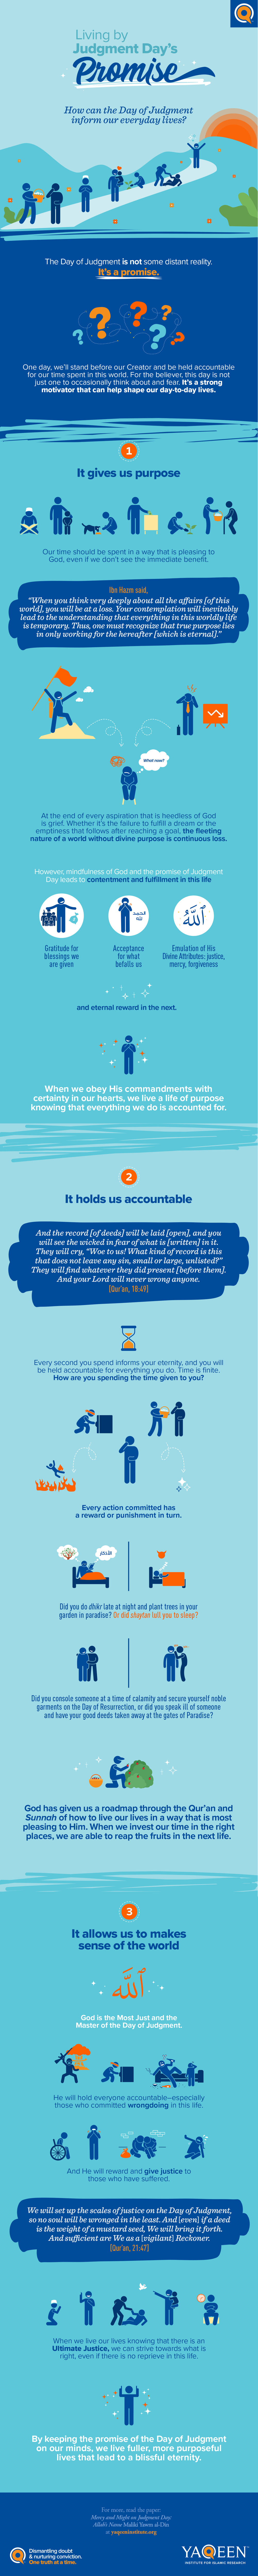 Infographic - Mercy and Might on Judgment Day